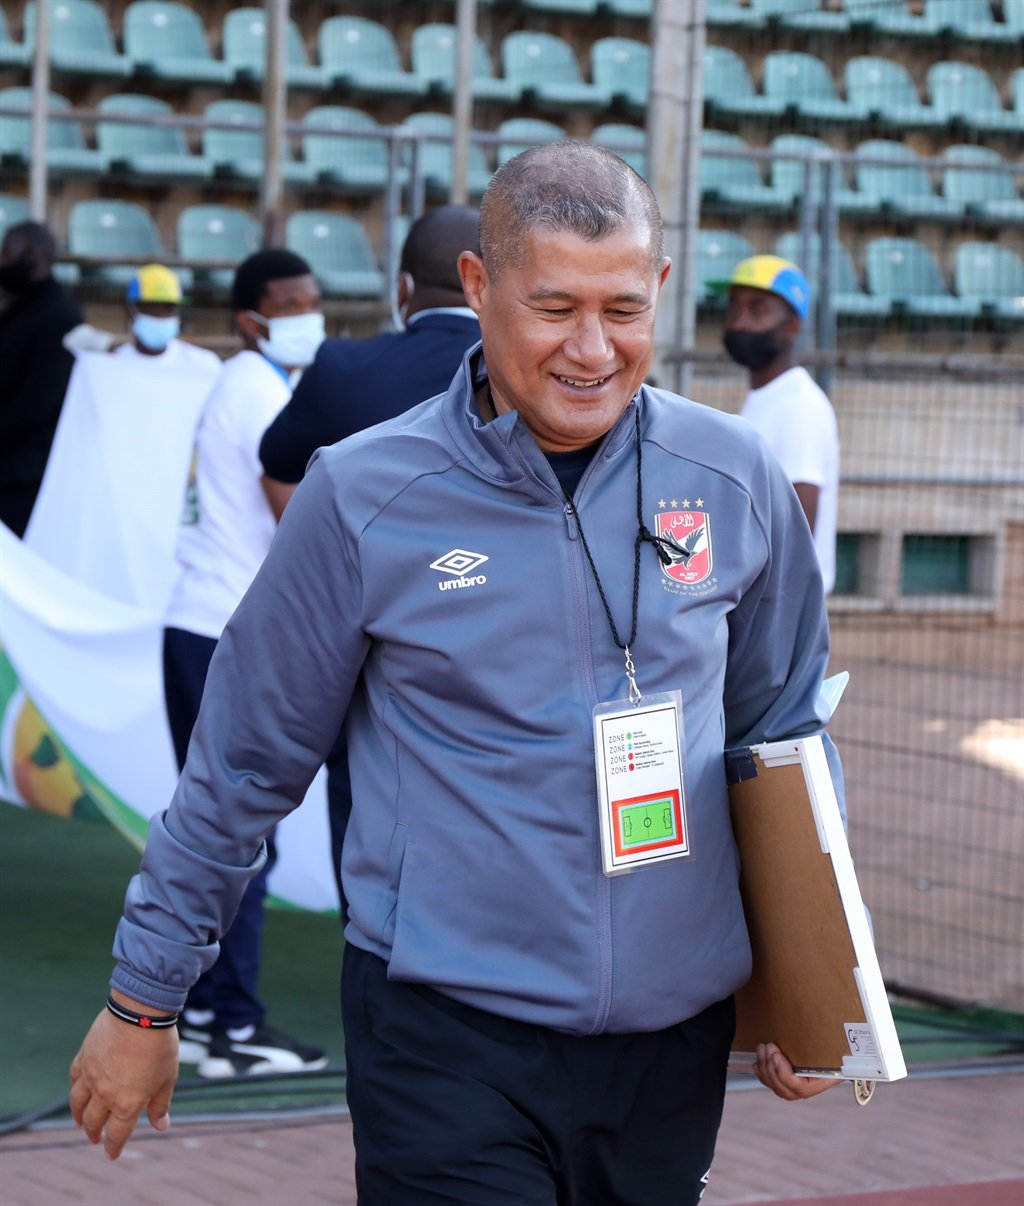 Cavin Johnson as assistant coach of Al Ahly during the 2021 CAF Champions League quarterfinal football match between Mamelodi Sundowns and Al Ahly at Lucas Moripe Stadium, Pretoria, South Africa on 22 May 2021 